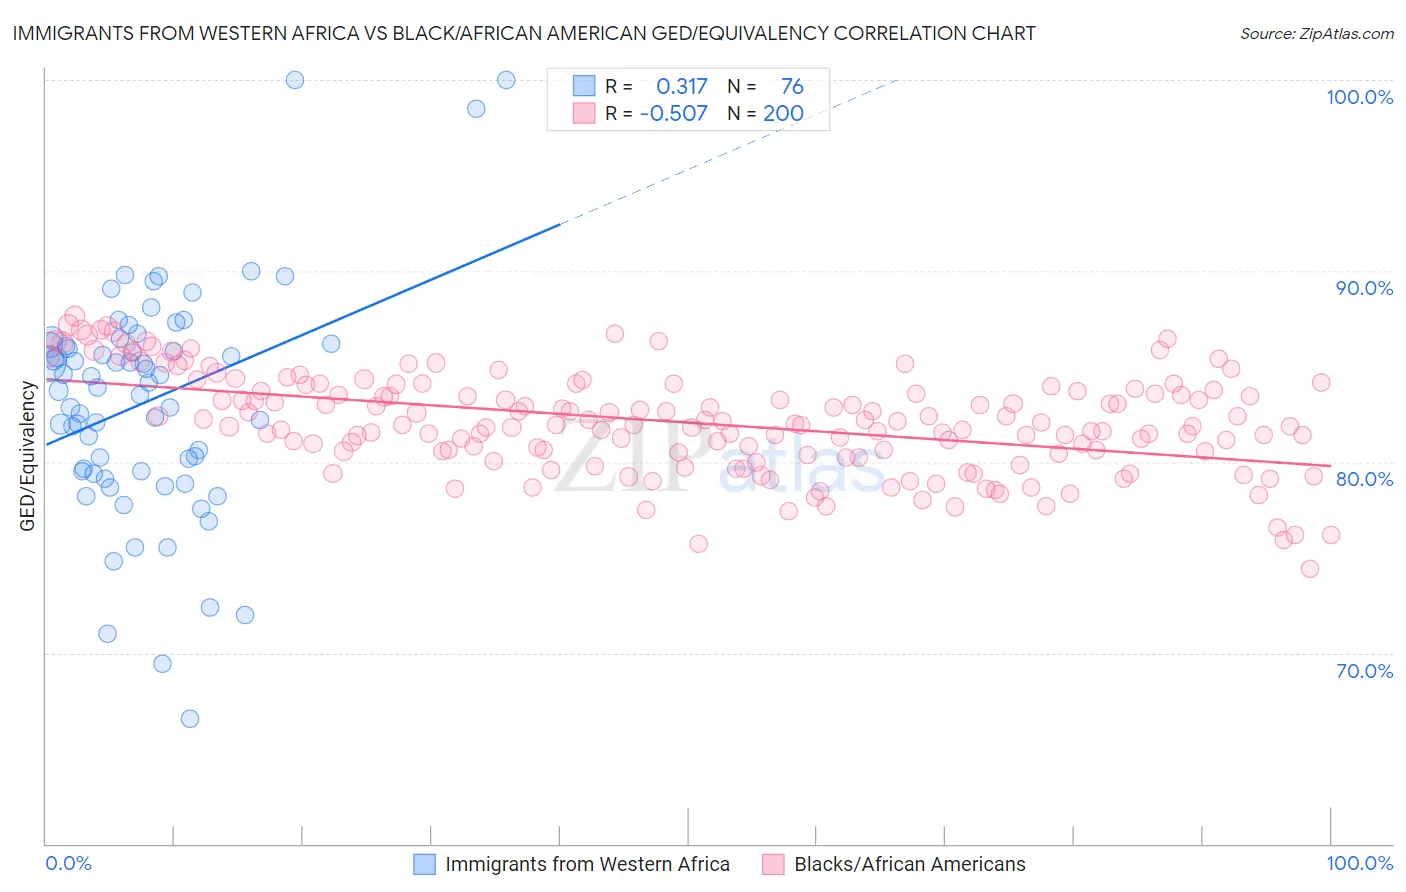 Immigrants from Western Africa vs Black/African American GED/Equivalency